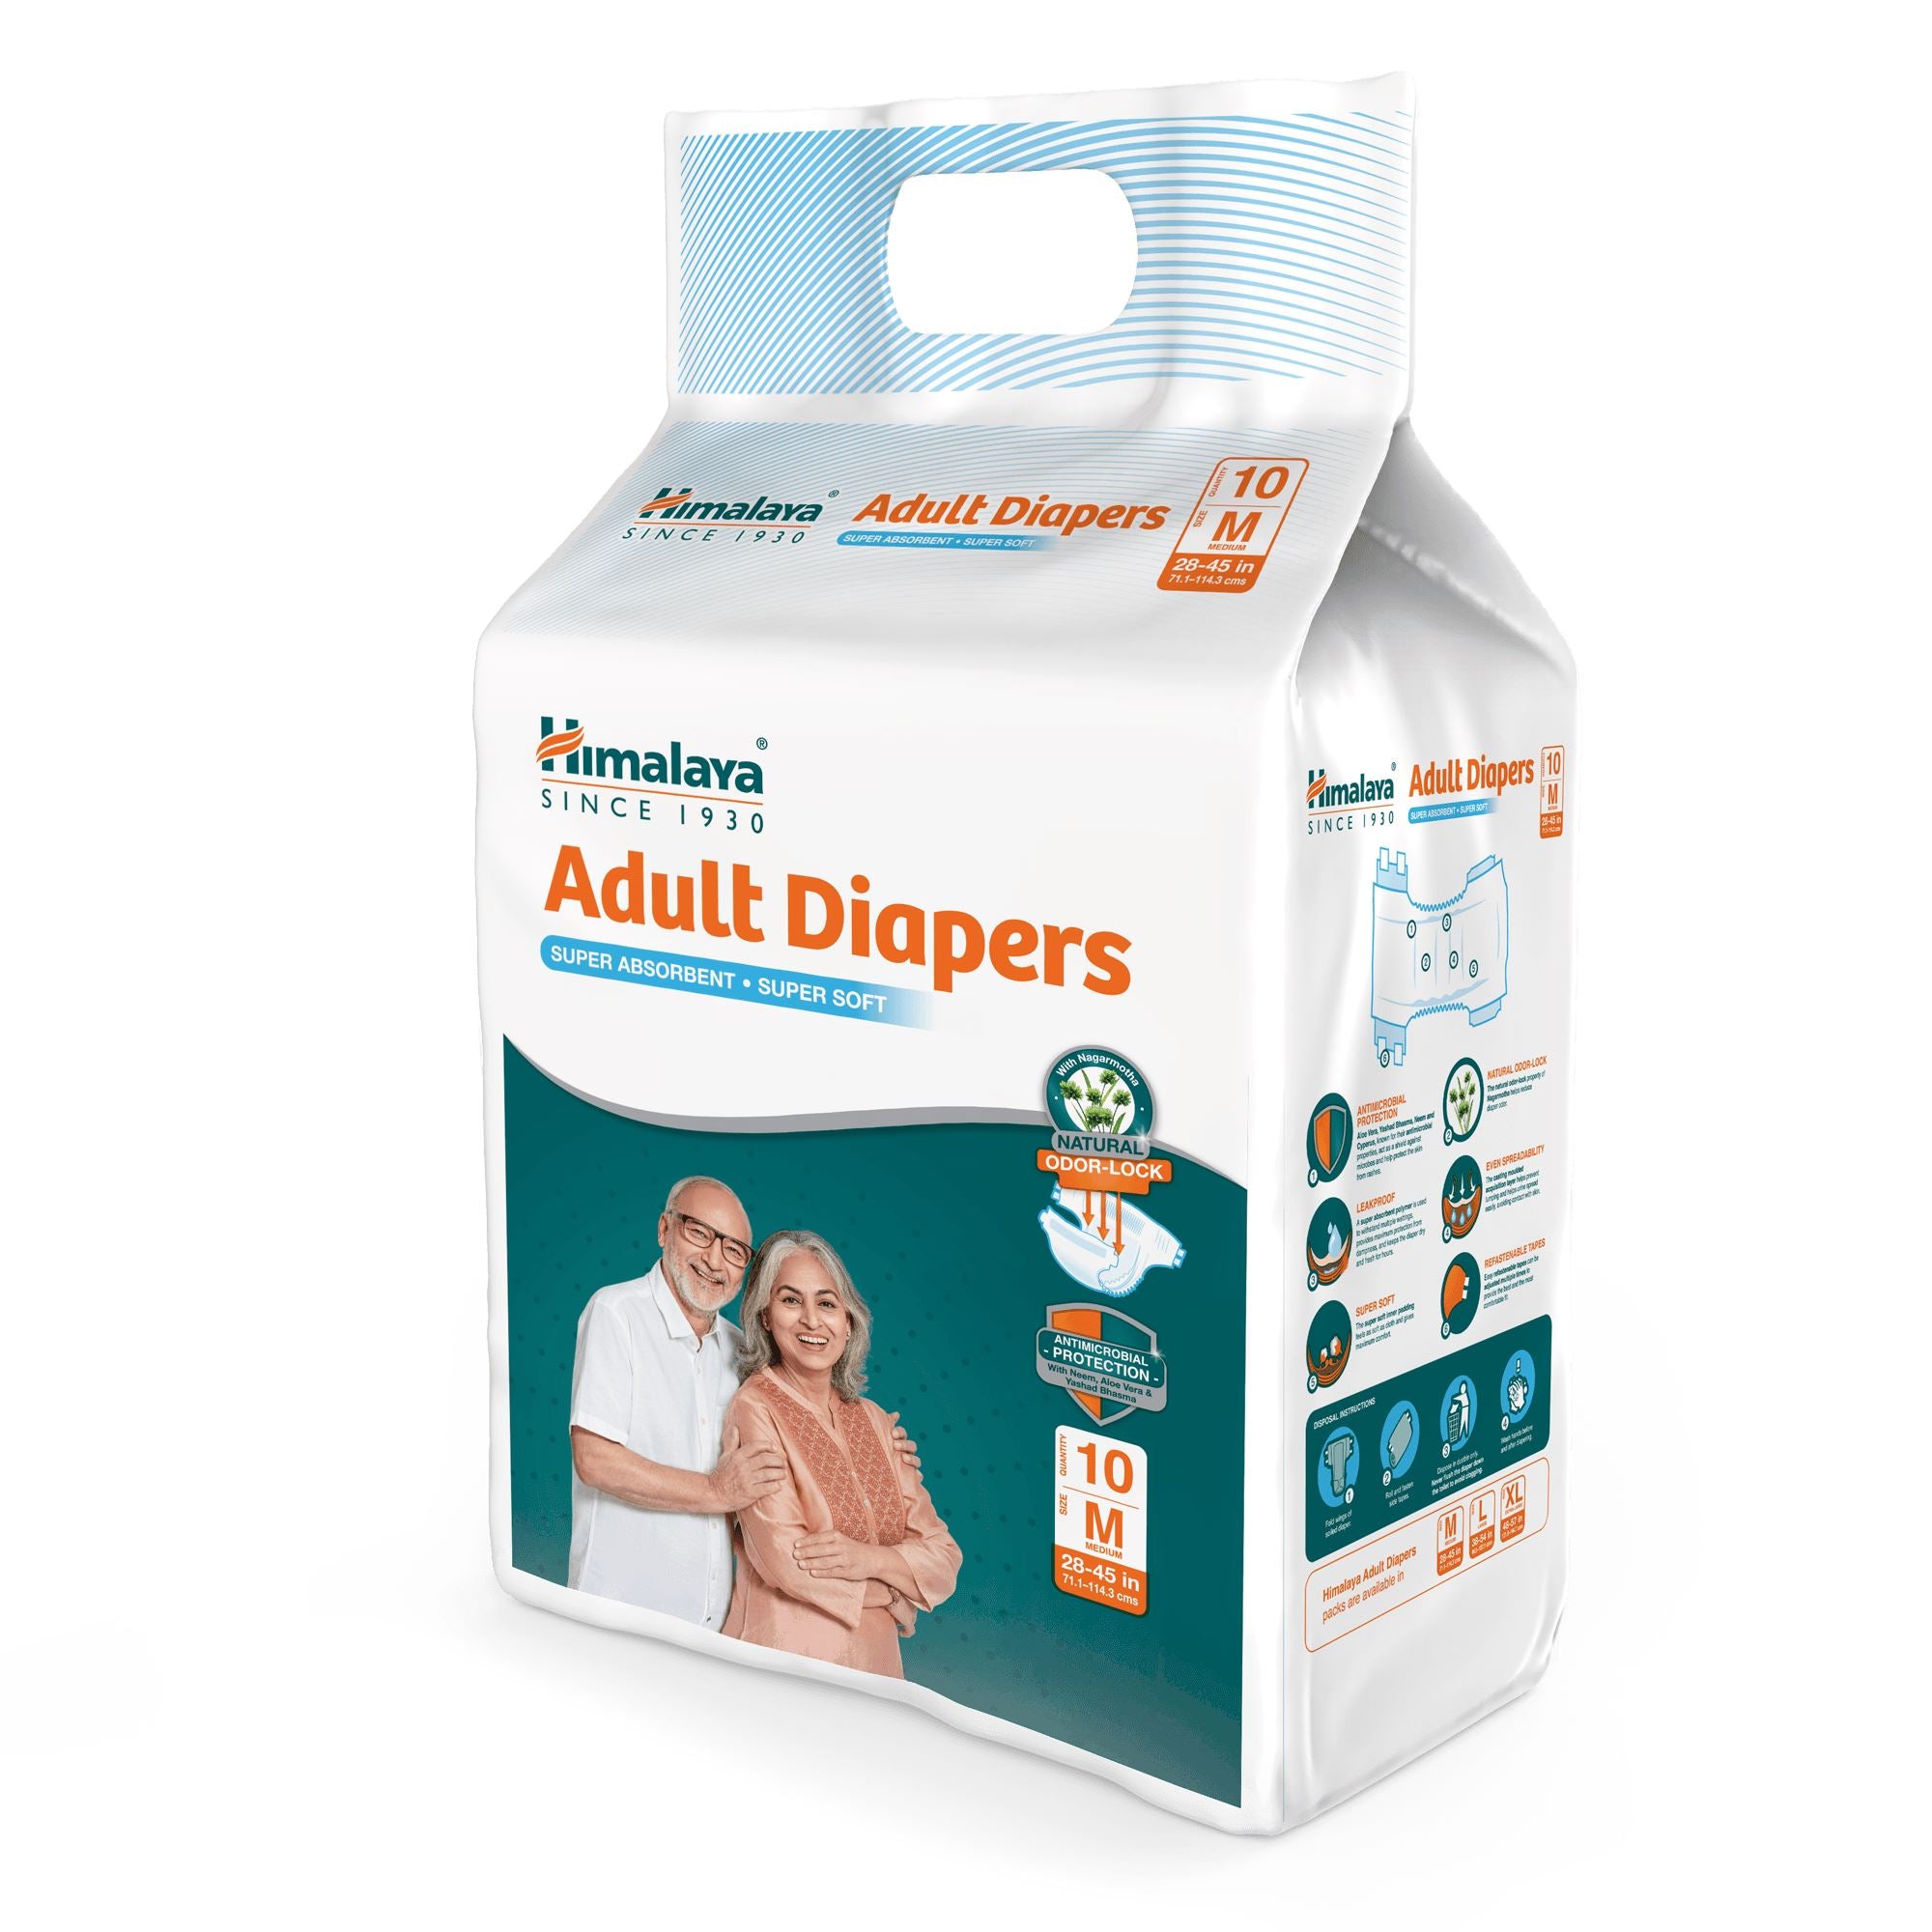 Himalaya Adult Diapers - Soft, Comfortable Adult Diapers